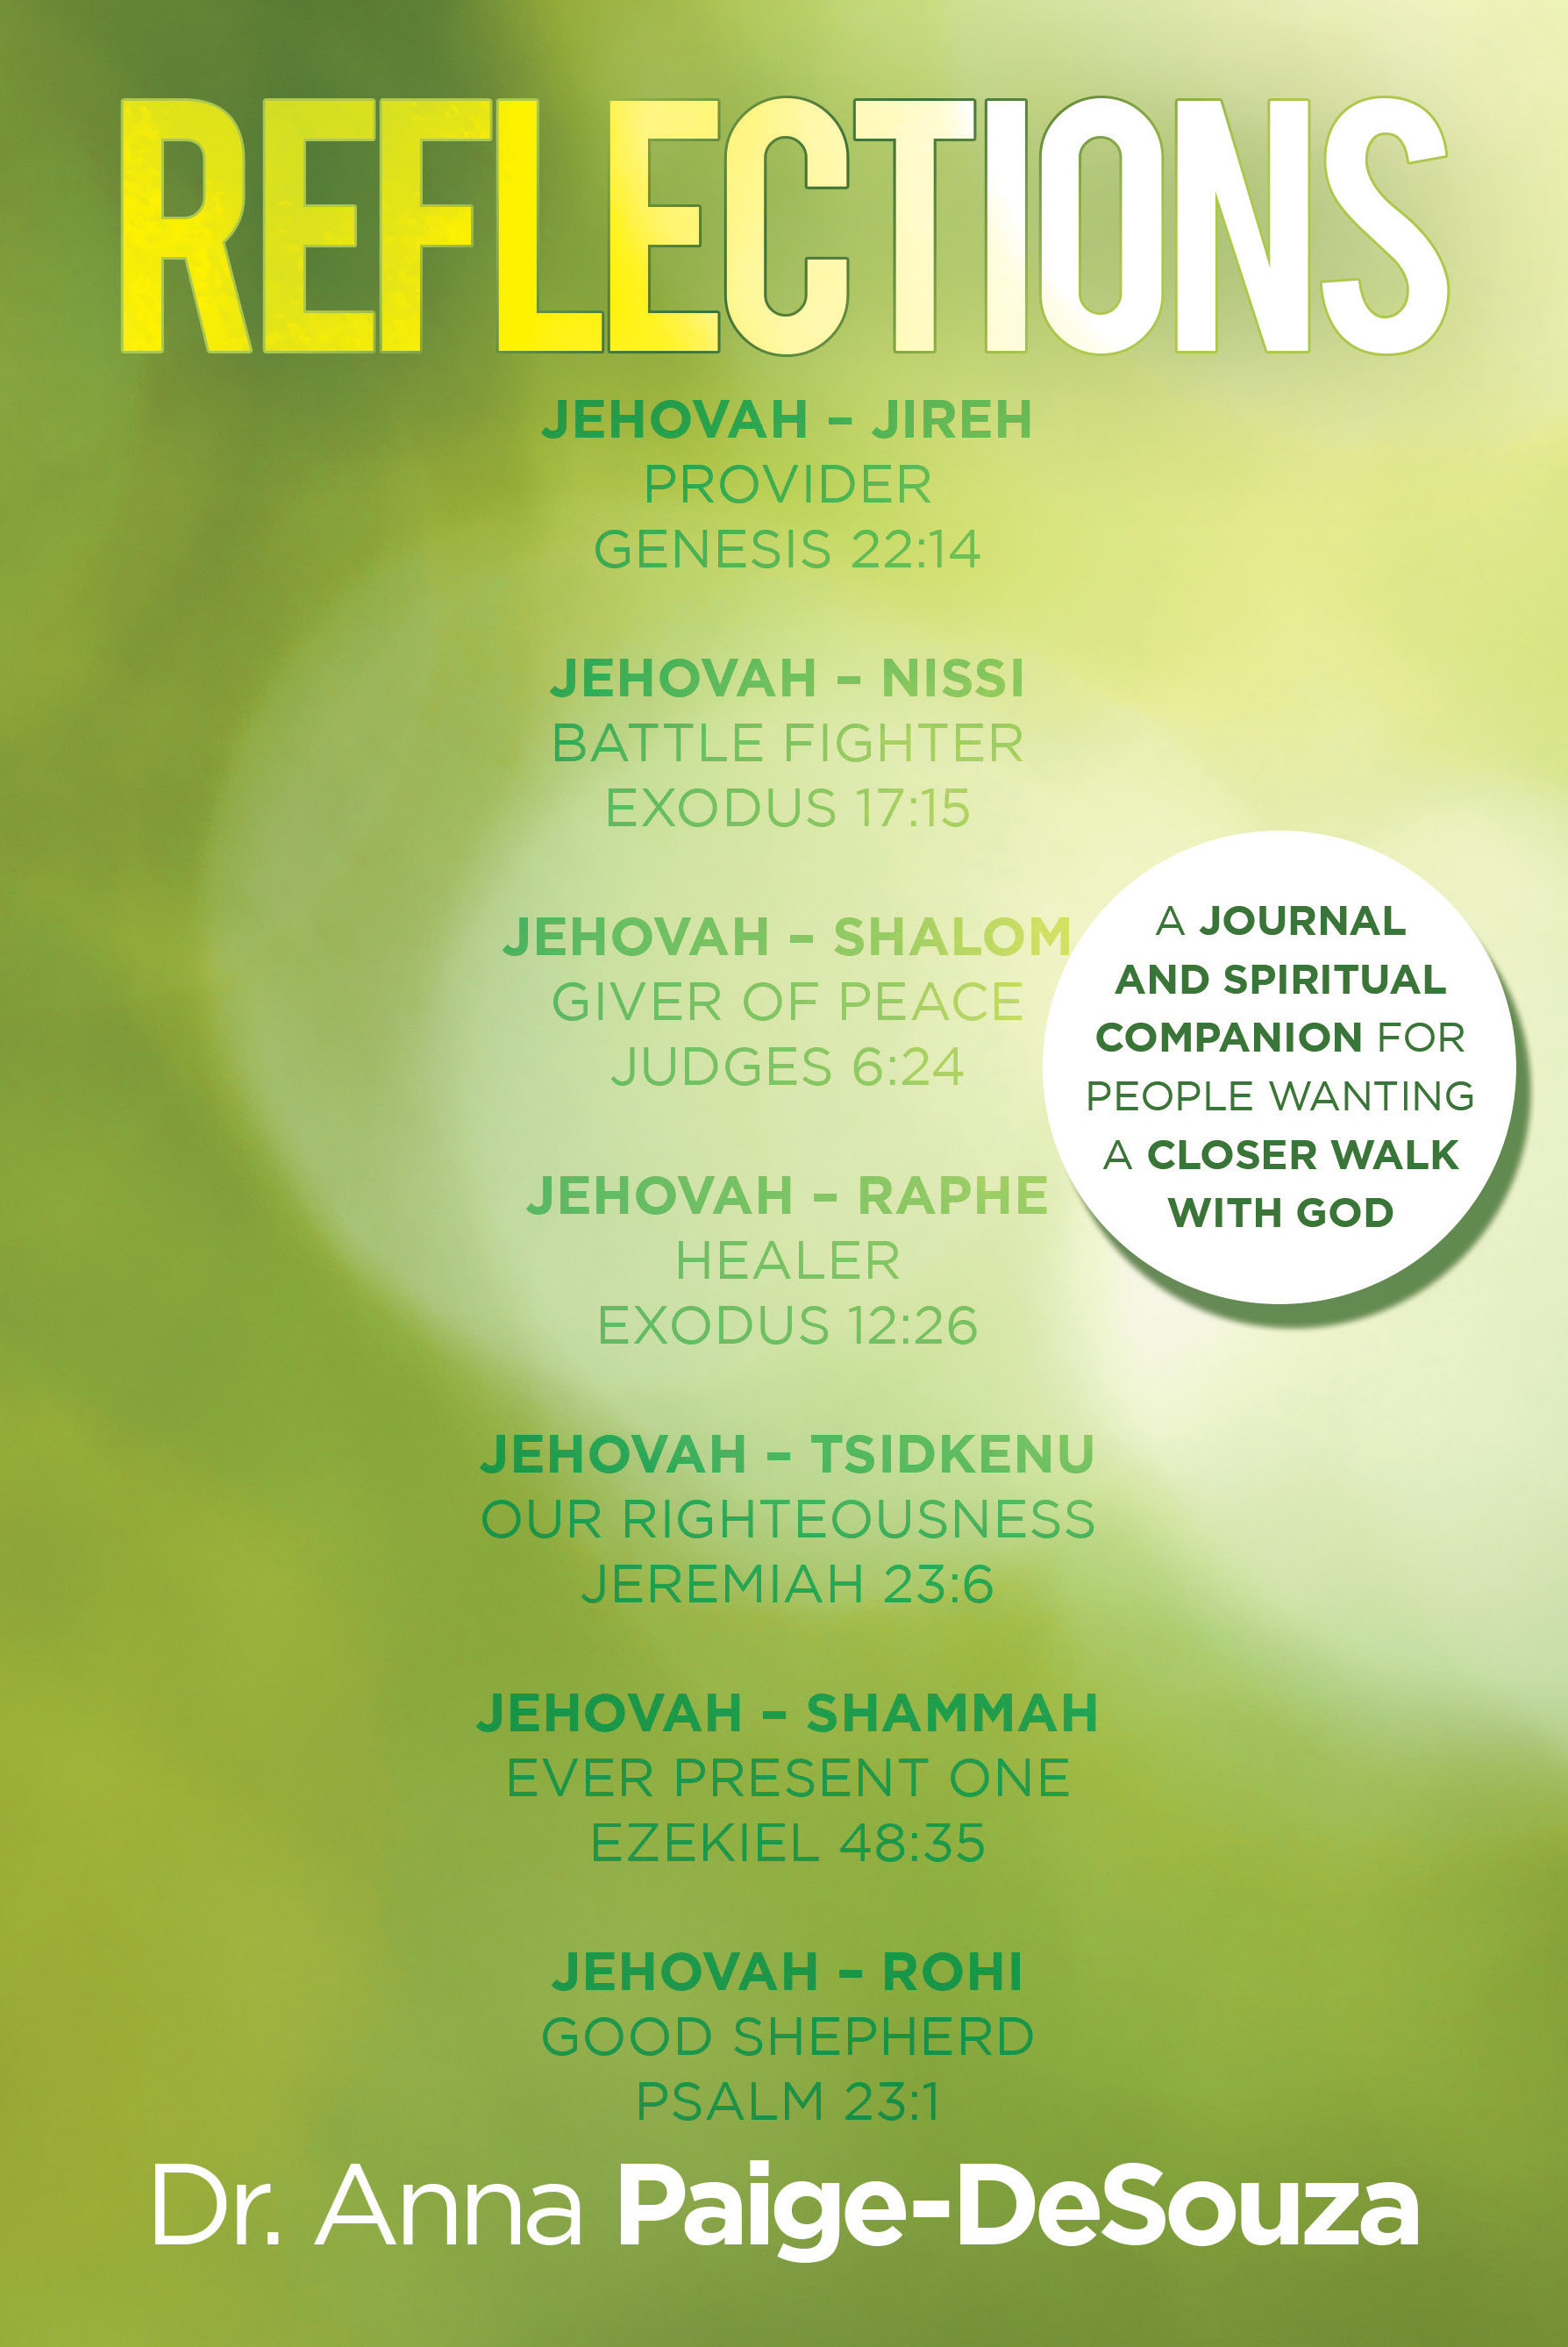 Reflections:  A Journal And Spiritual Companion for People Wanting A Closer Walk With God.